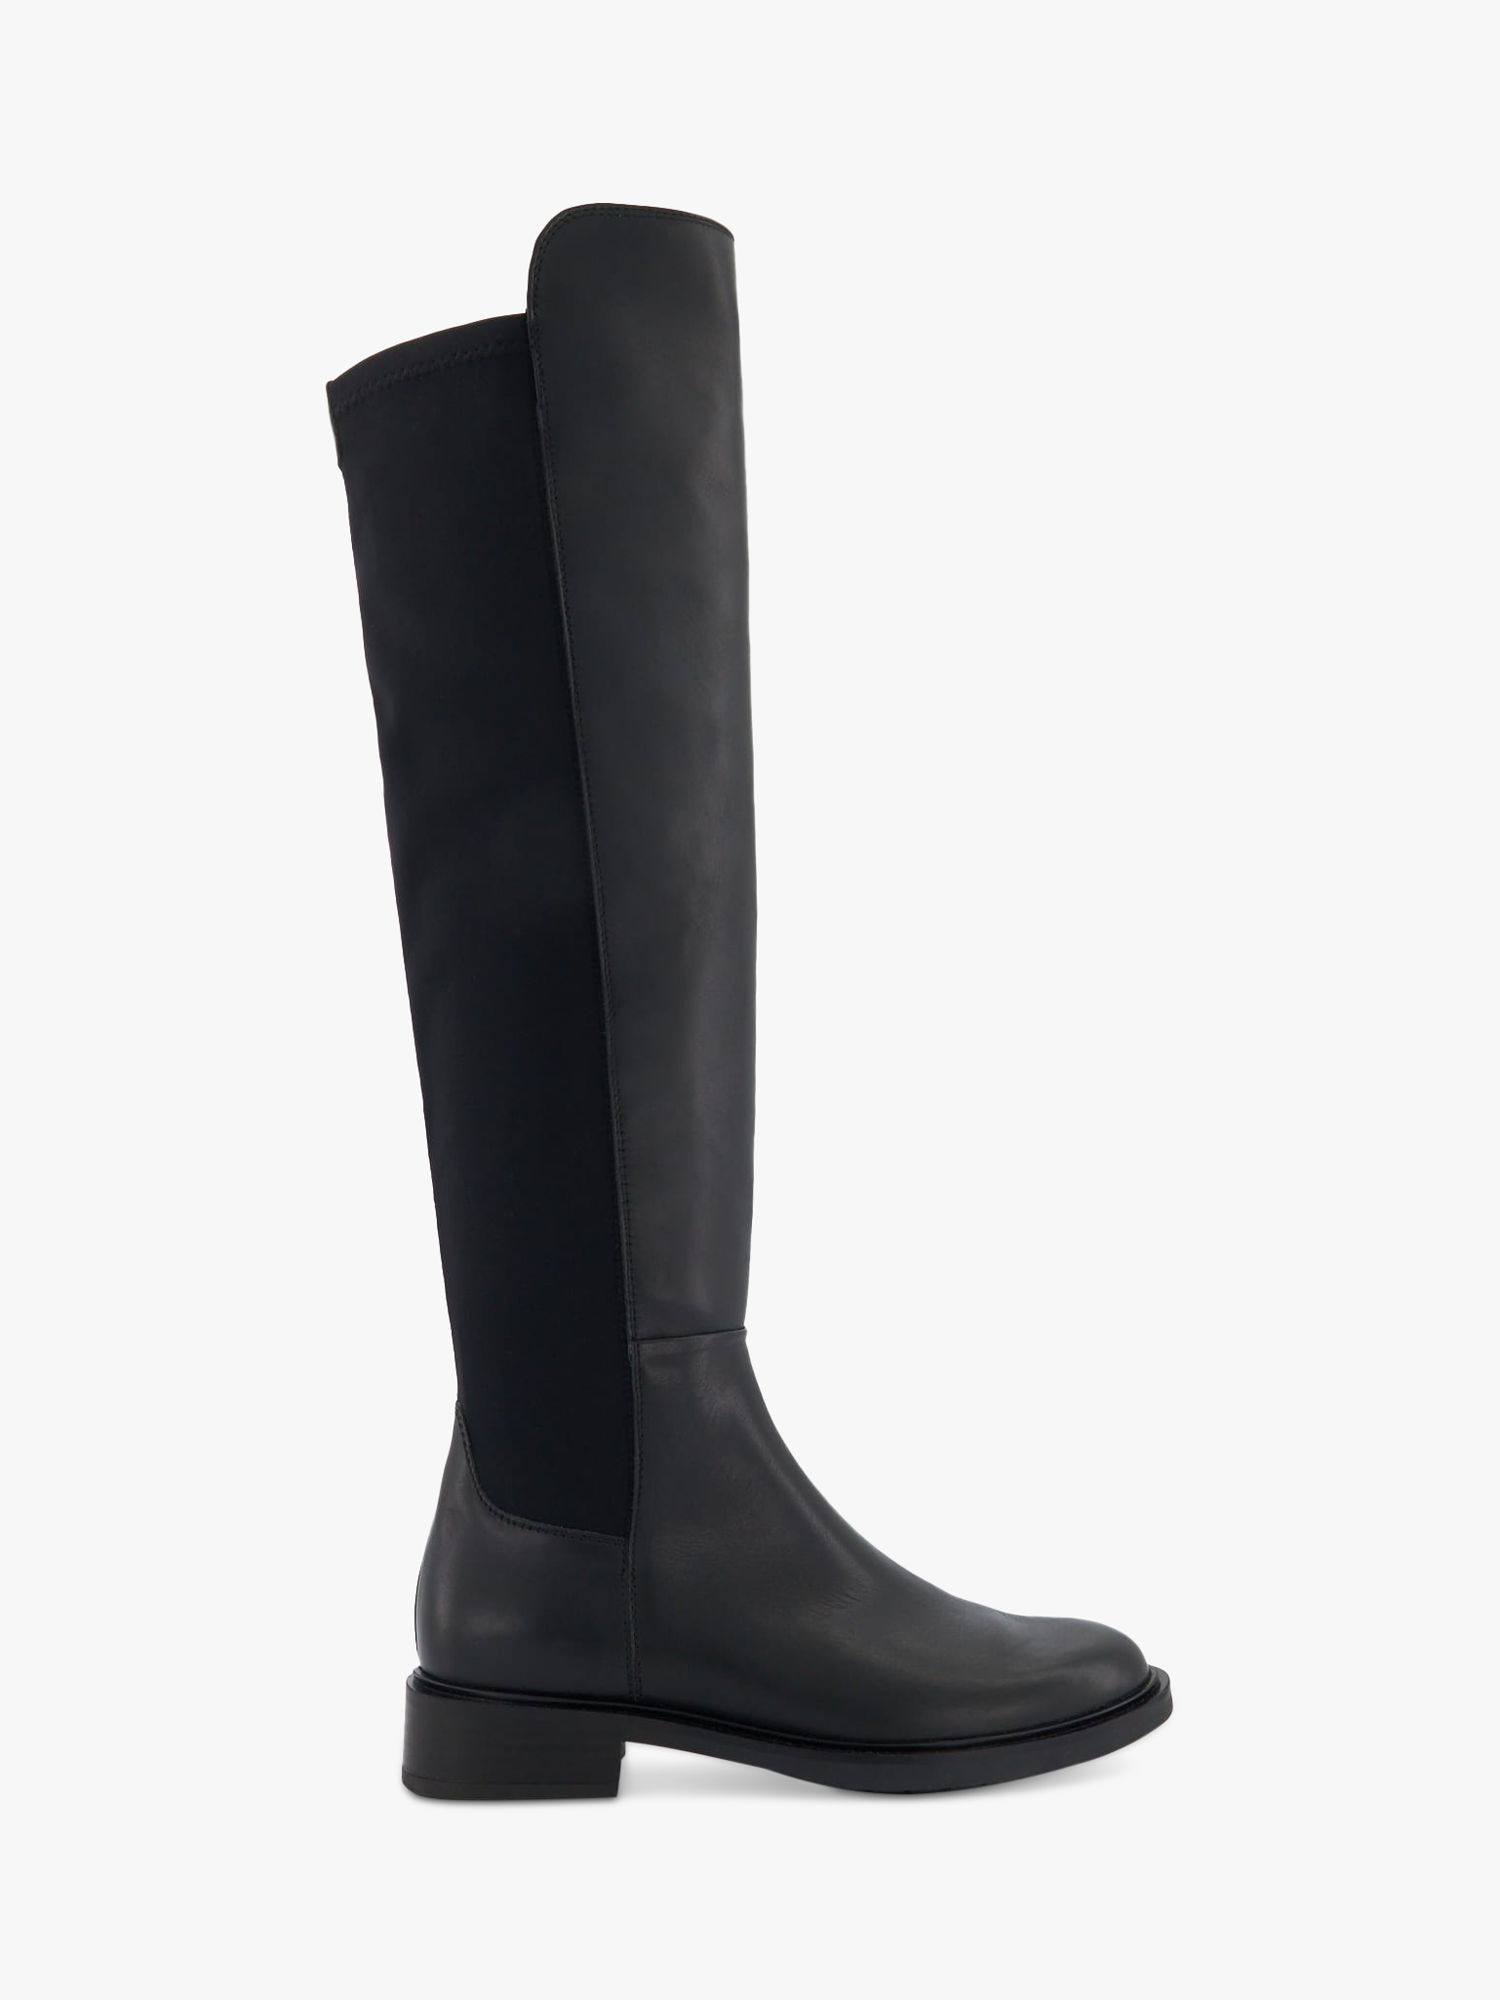 Dune Text Leather Knee High Boots, Black at John Lewis & Partners